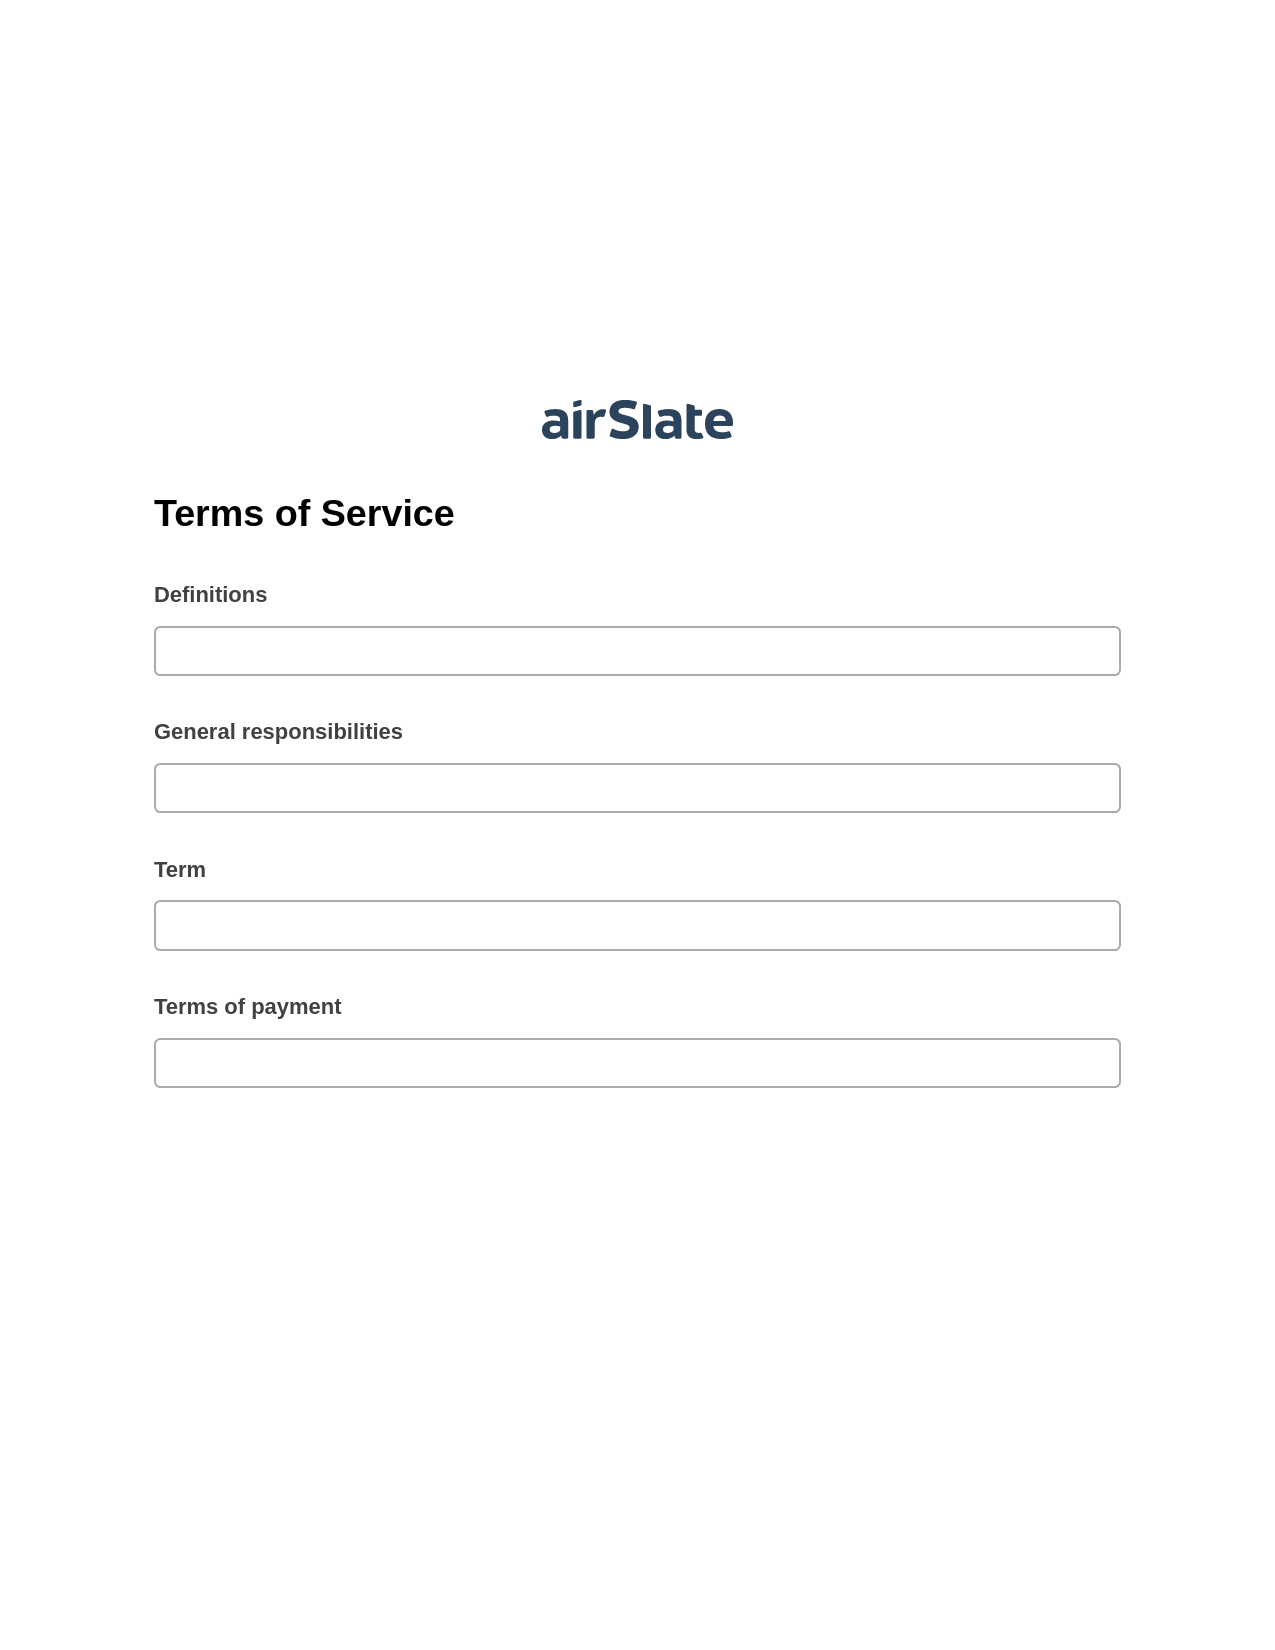 Multirole Terms of Service Pre-fill Slate from MS Dynamics 365 Records Bot, Open as Role Bot, Export to Google Sheet Bot